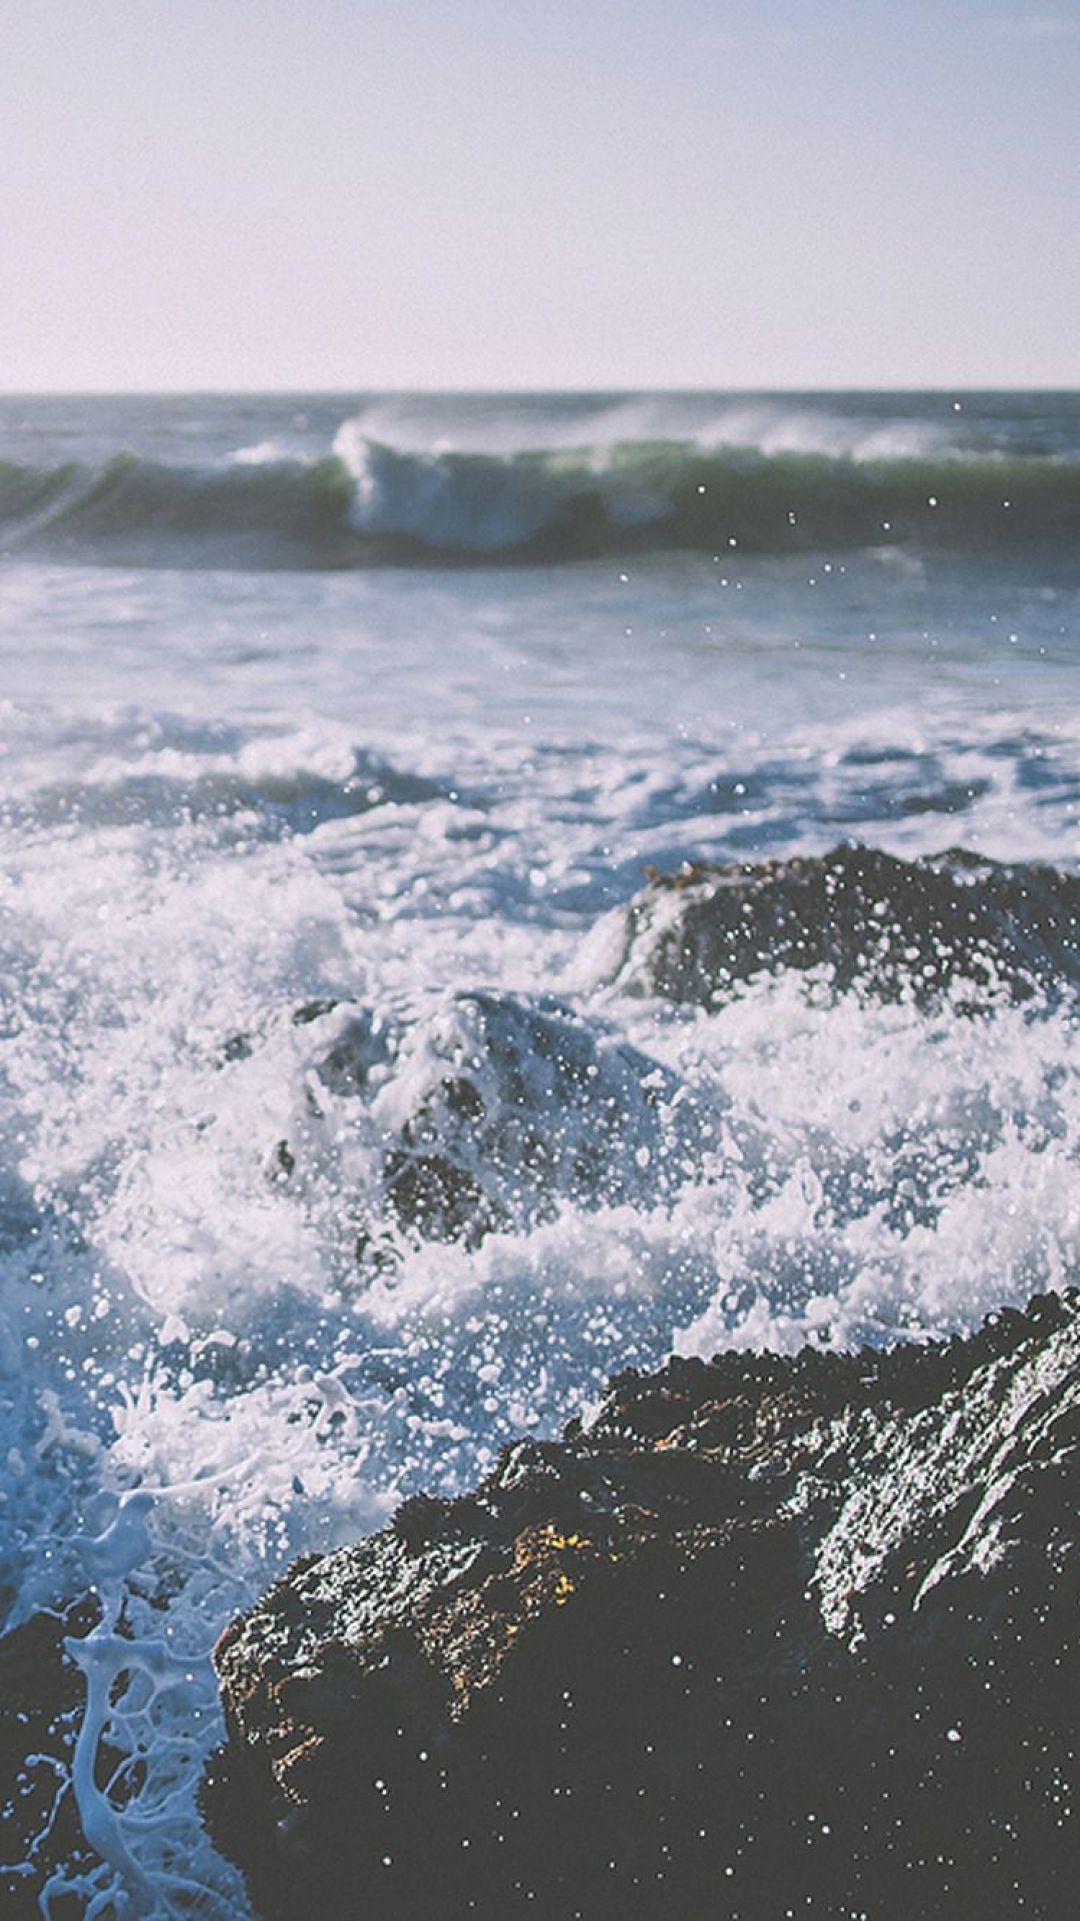 IPhone wallpaper with a picture of the sea - Ocean